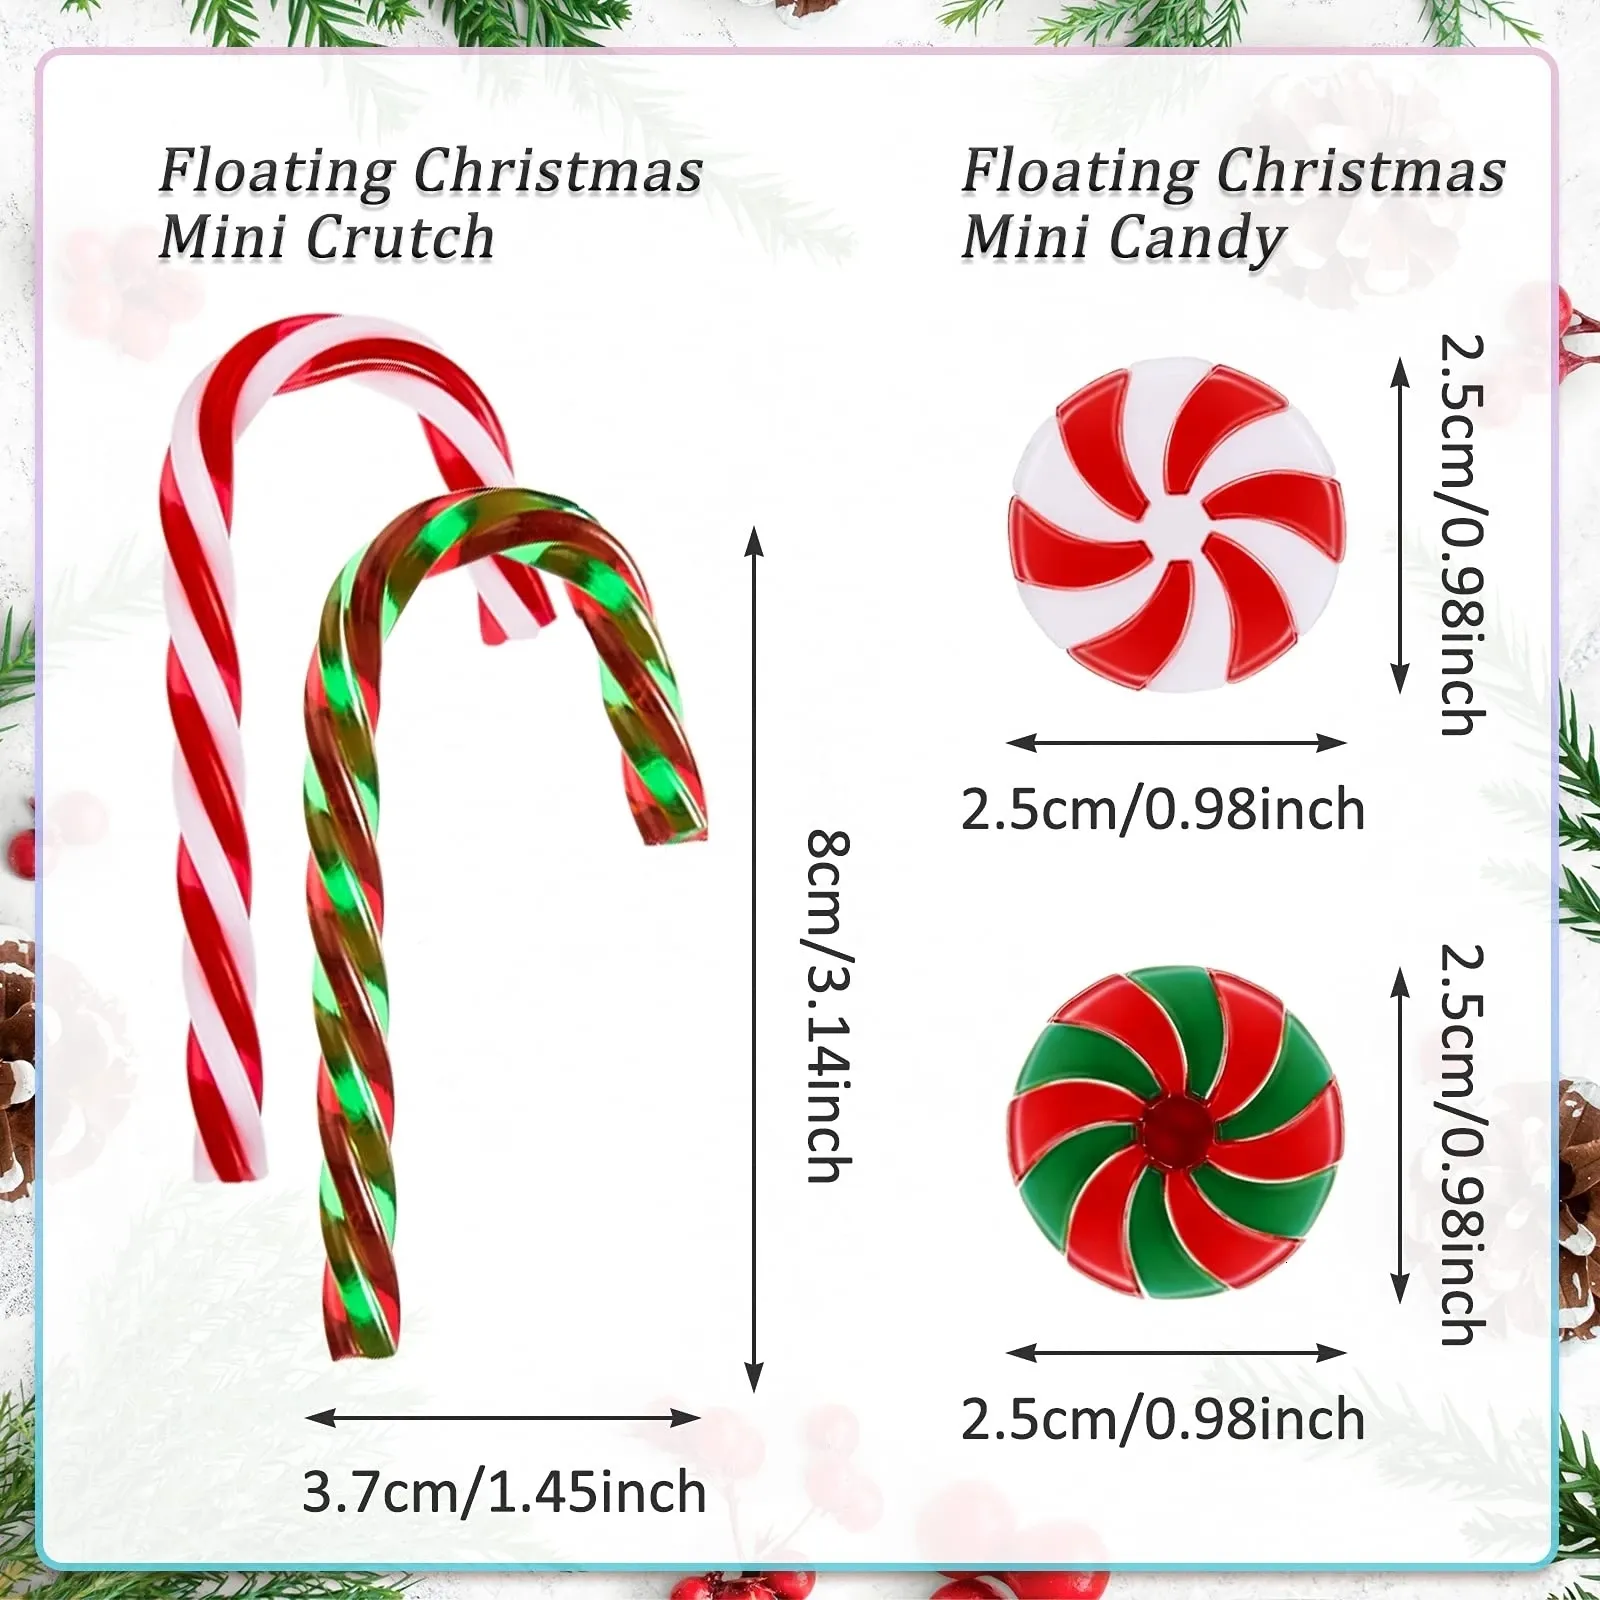 Christmas Vase Filler With Acrylic Candyland Ornament And Crystal Clear  Water Gel For Event Parties White And Red Pearls Christmas Beads Included  230512 From Xianstore08, $10.47